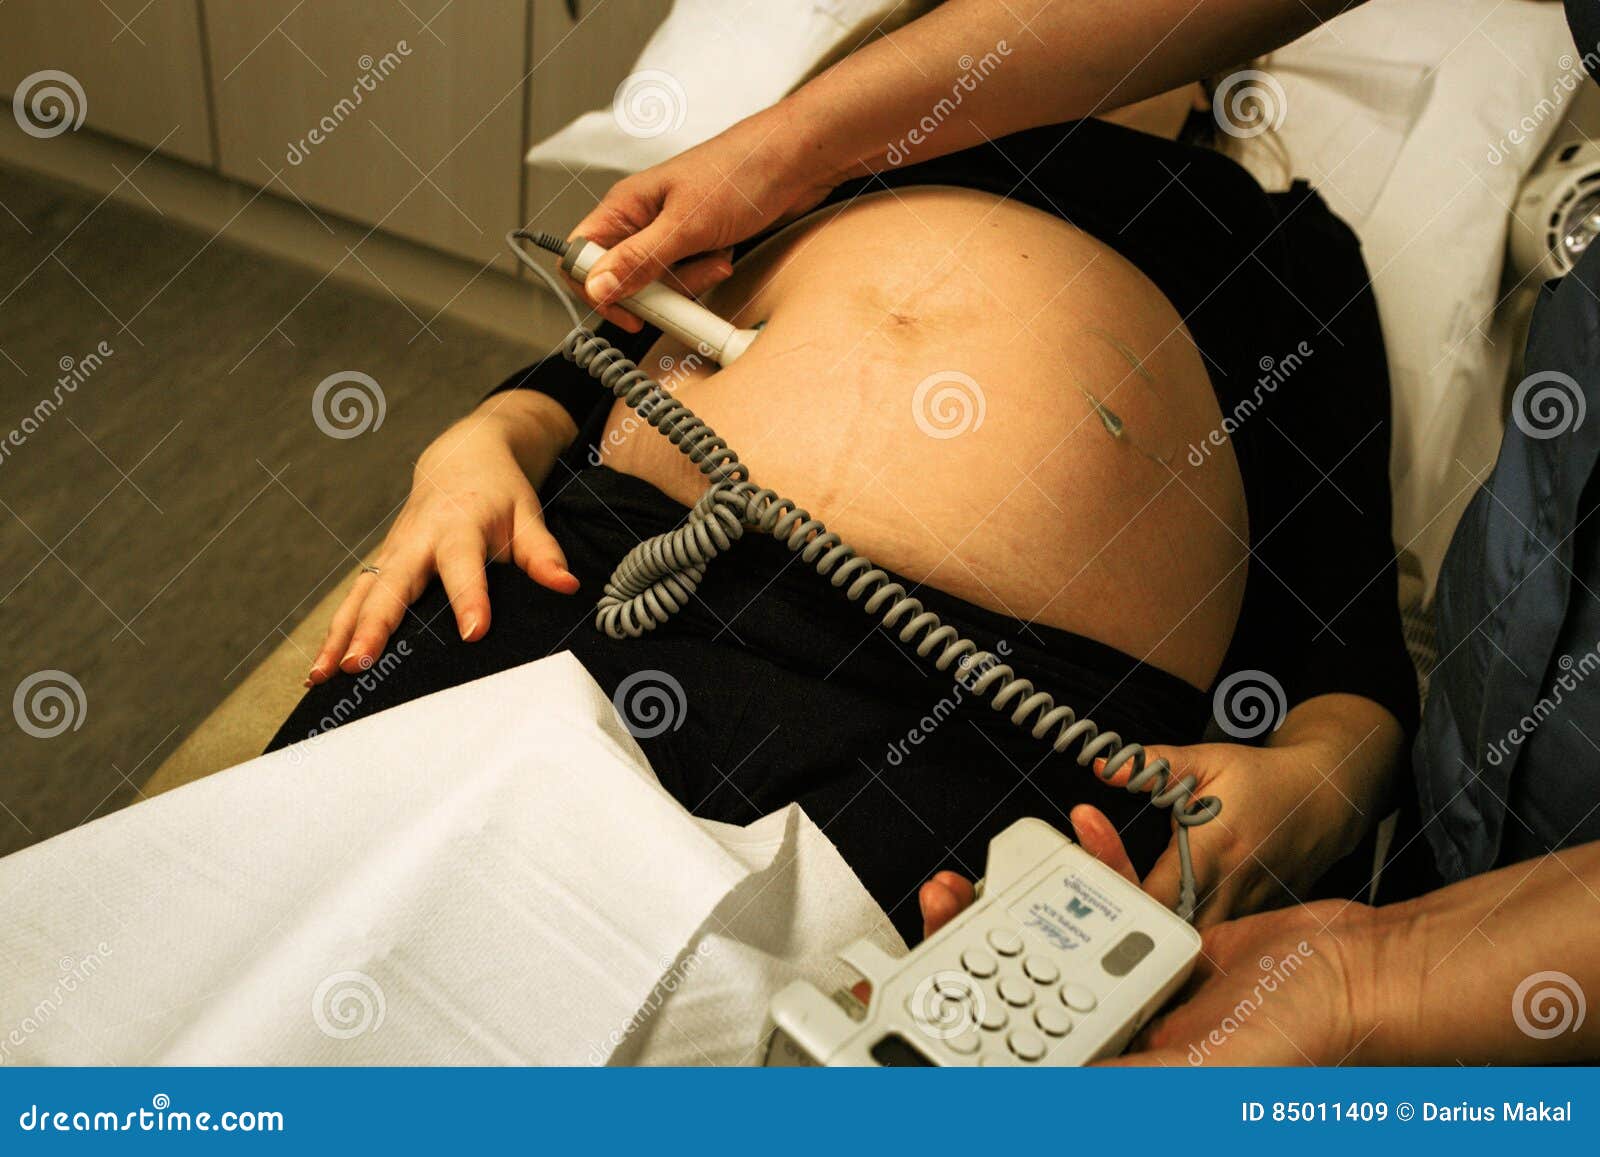 Pregnant Woman In Doctors Office Stock Image Image Of Abdomen Hu